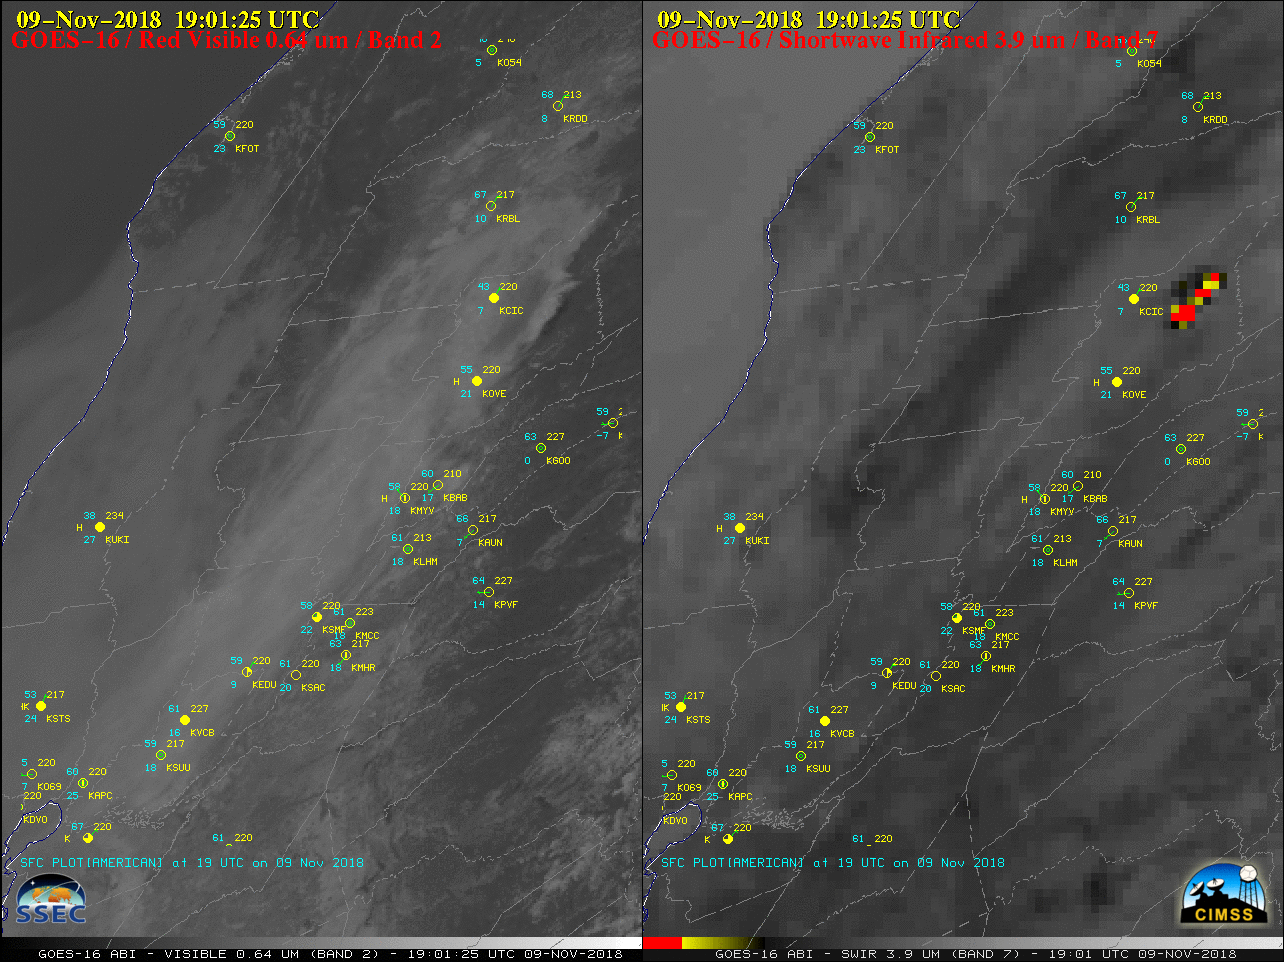 GOES-16 "Red" Visible (0.64 µm, left) and Shortwave Infrared (3.9 µm, right) images [click to play MP4 animation]